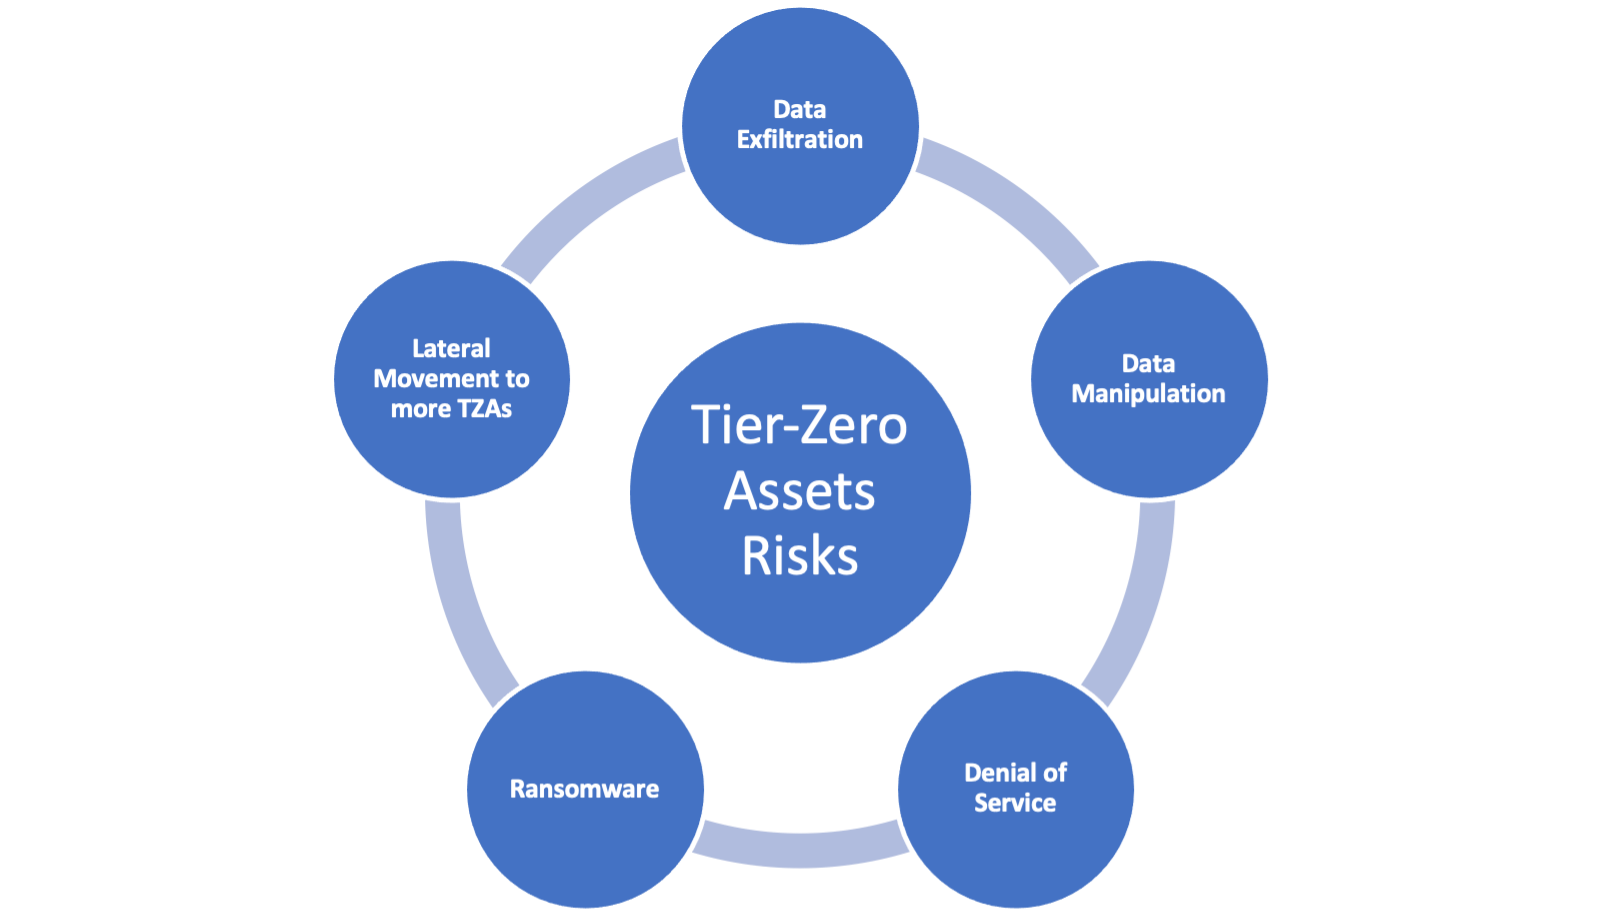 Tier-zero assets that attackers typically target: data exfiltration, data manipulation, DoS, ransomware, and lateral movement